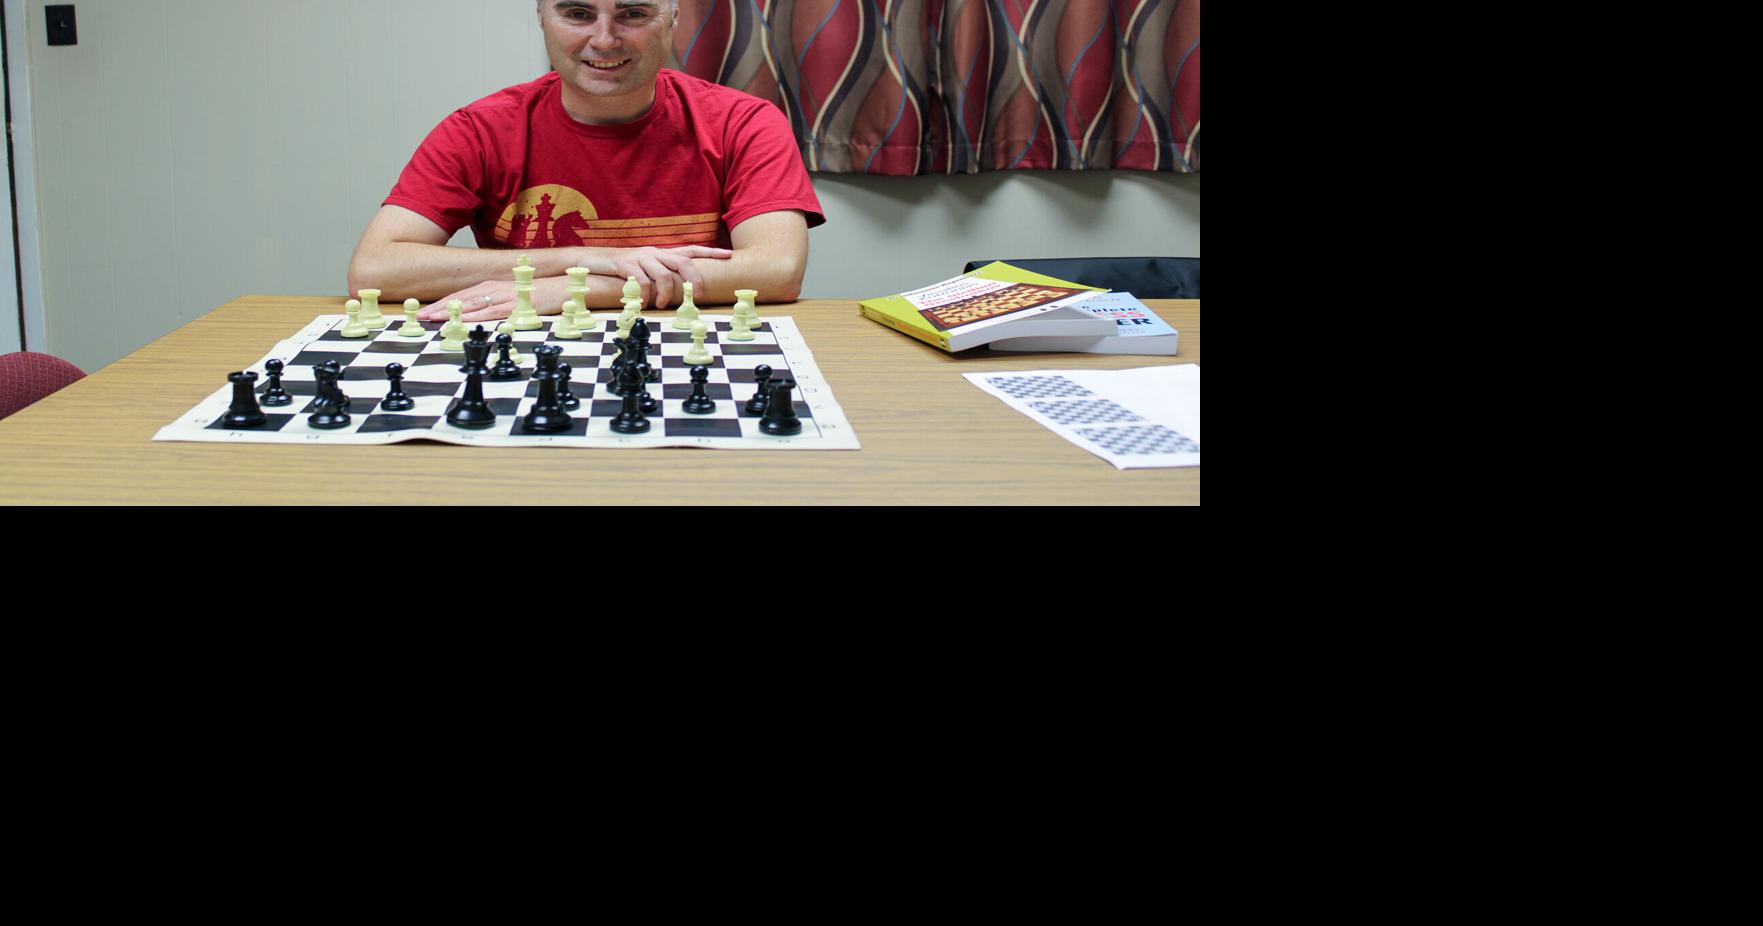 Chess Kingdom : Online Chess - Apps on Google Play